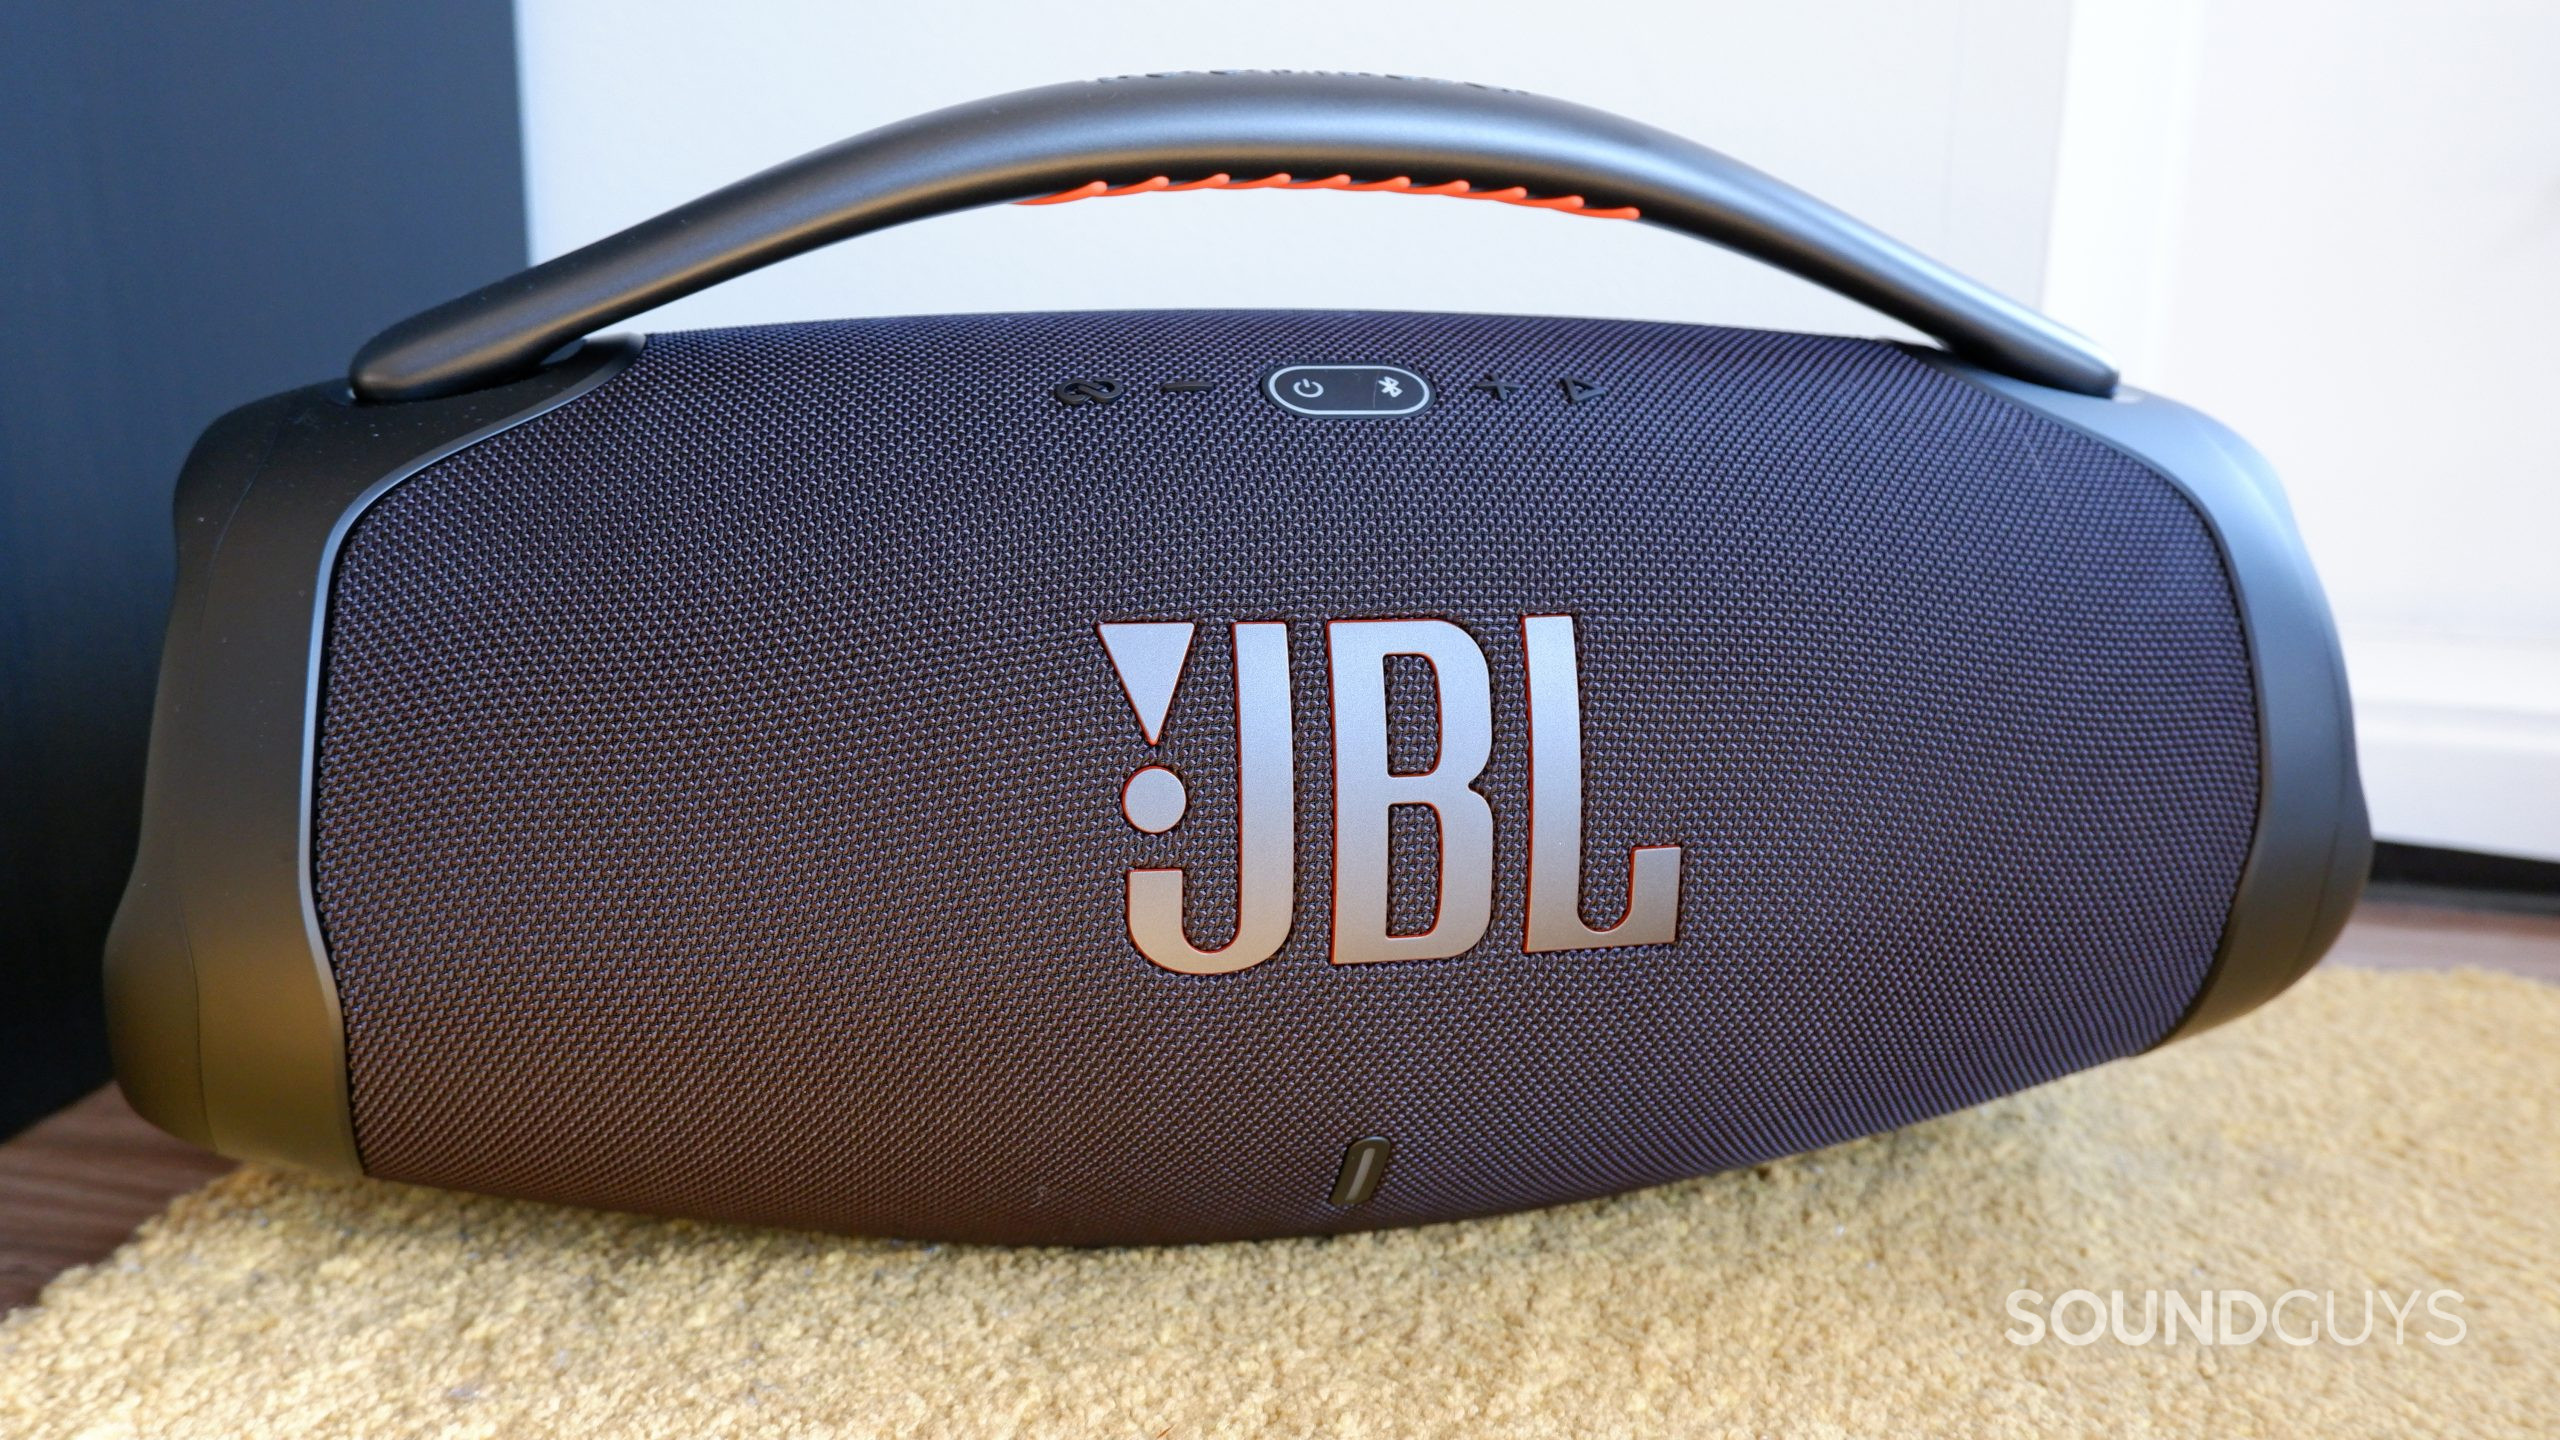 The JBL Boombox 3 on a carpet.